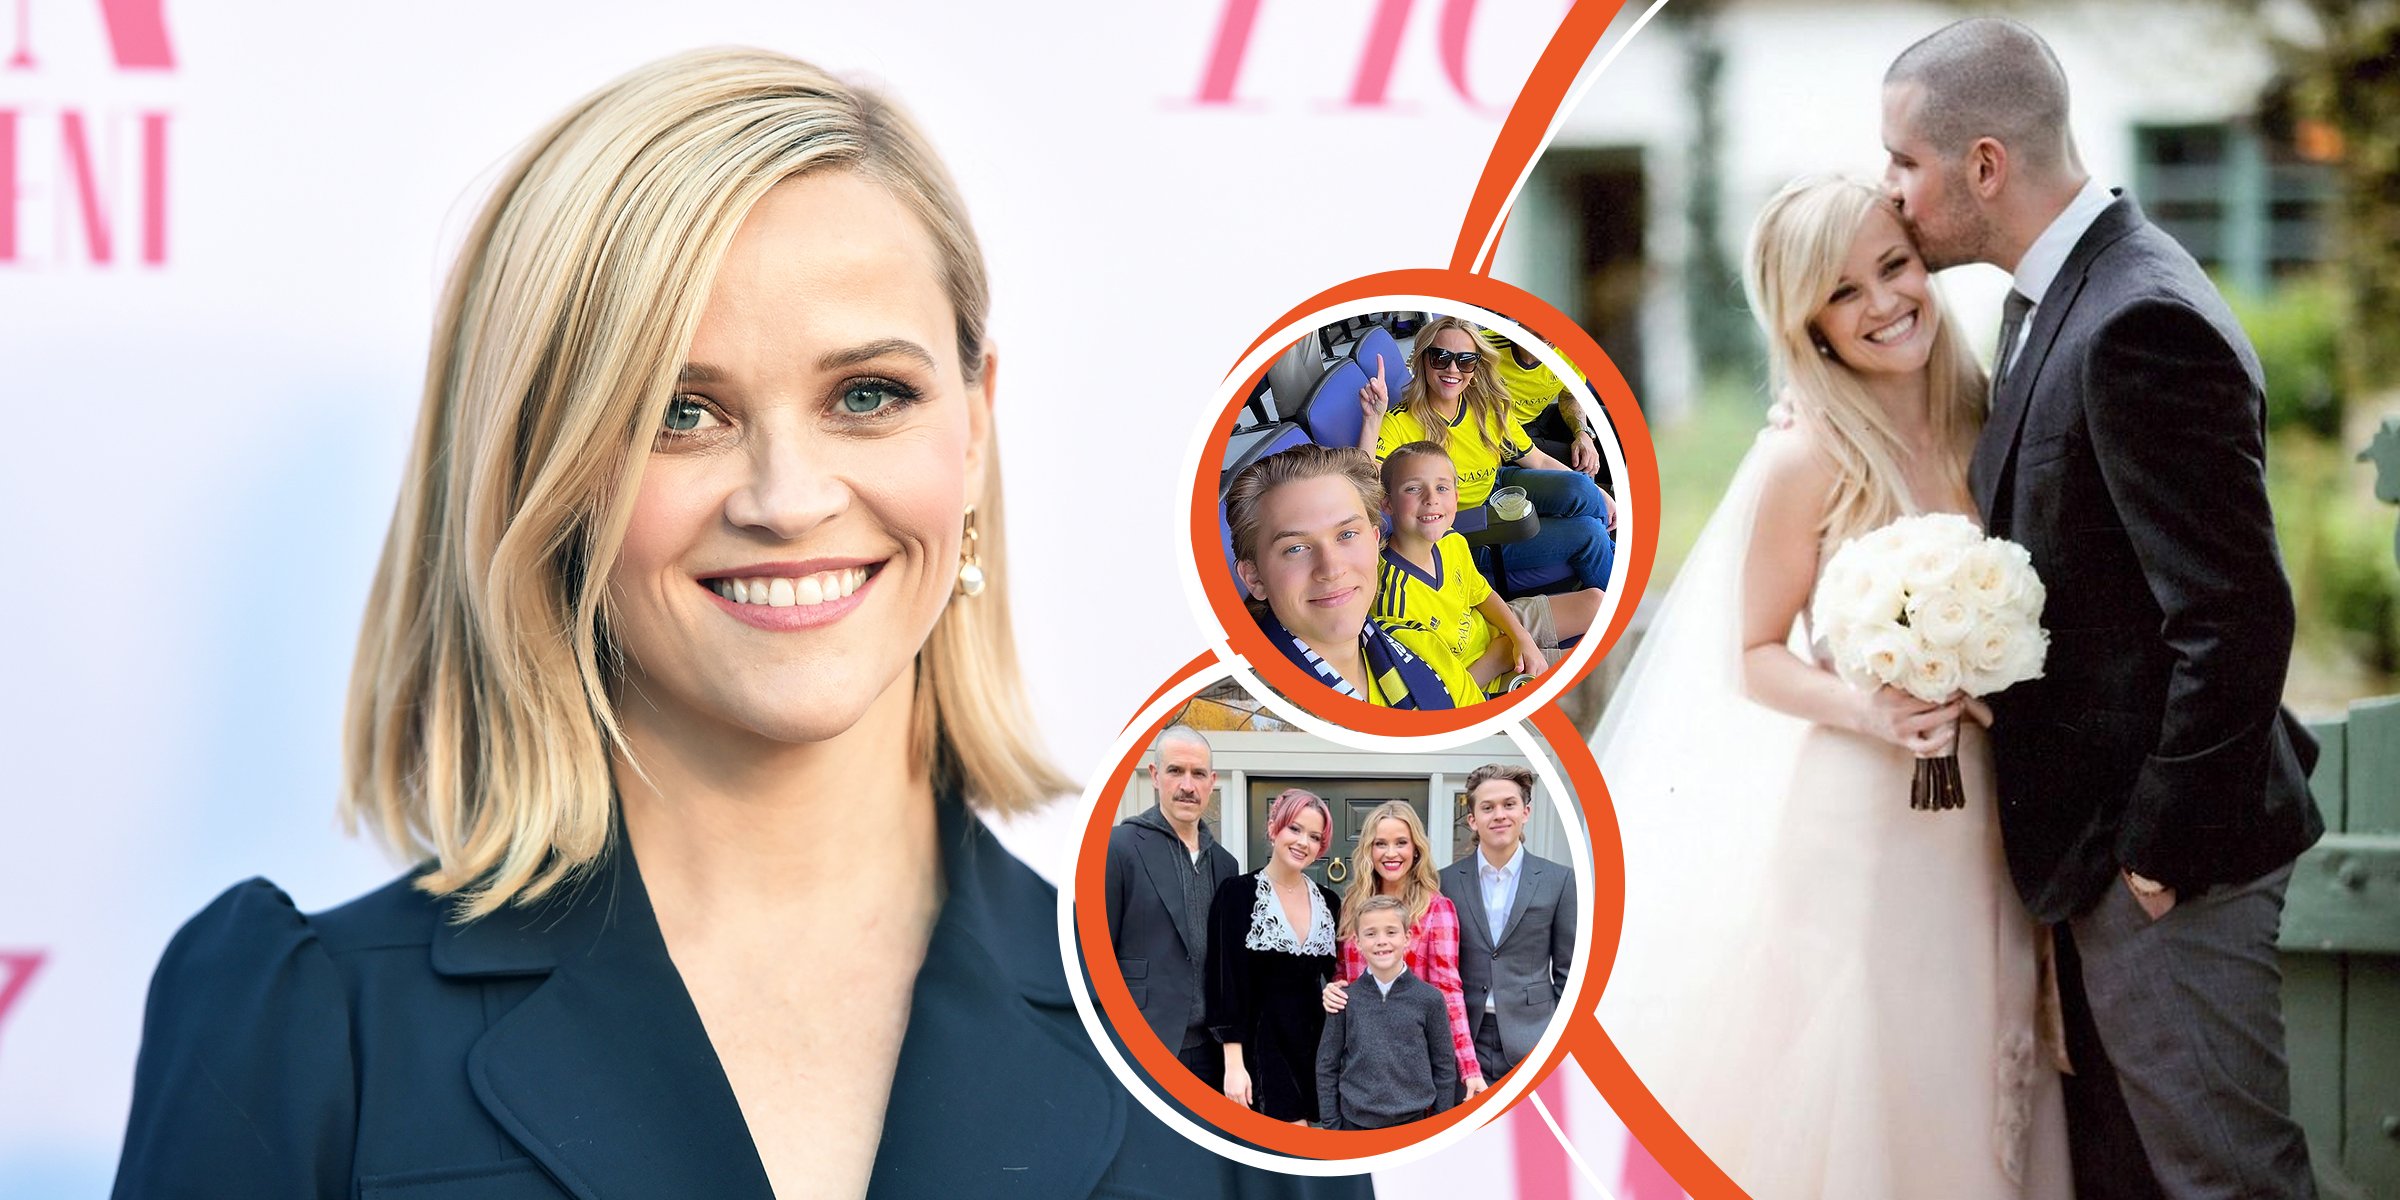 Reese Witherspoon | Reese Witherspoon, Jim Toth, Ava, Tennessee y Deacon | James Toth, Reese Witherspoon, Deacon y Tennessee | James Toth y Reese Witherspoon | Foto: Getty Images | instagram.com/reesewitherspoon